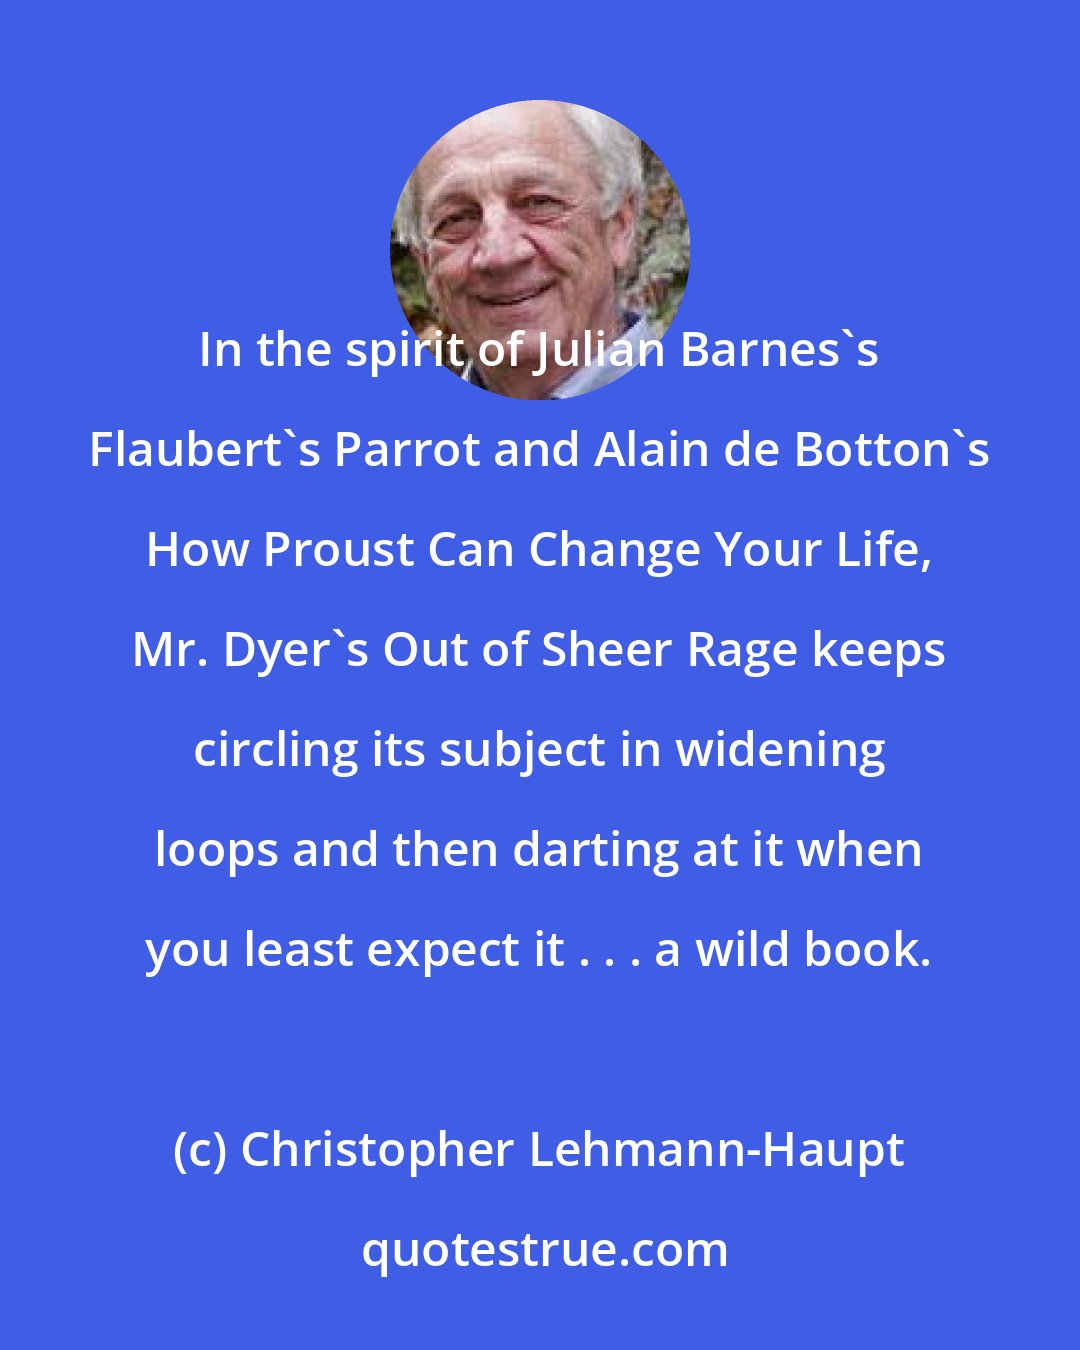 Christopher Lehmann-Haupt: In the spirit of Julian Barnes's Flaubert's Parrot and Alain de Botton's How Proust Can Change Your Life, Mr. Dyer's Out of Sheer Rage keeps circling its subject in widening loops and then darting at it when you least expect it . . . a wild book.